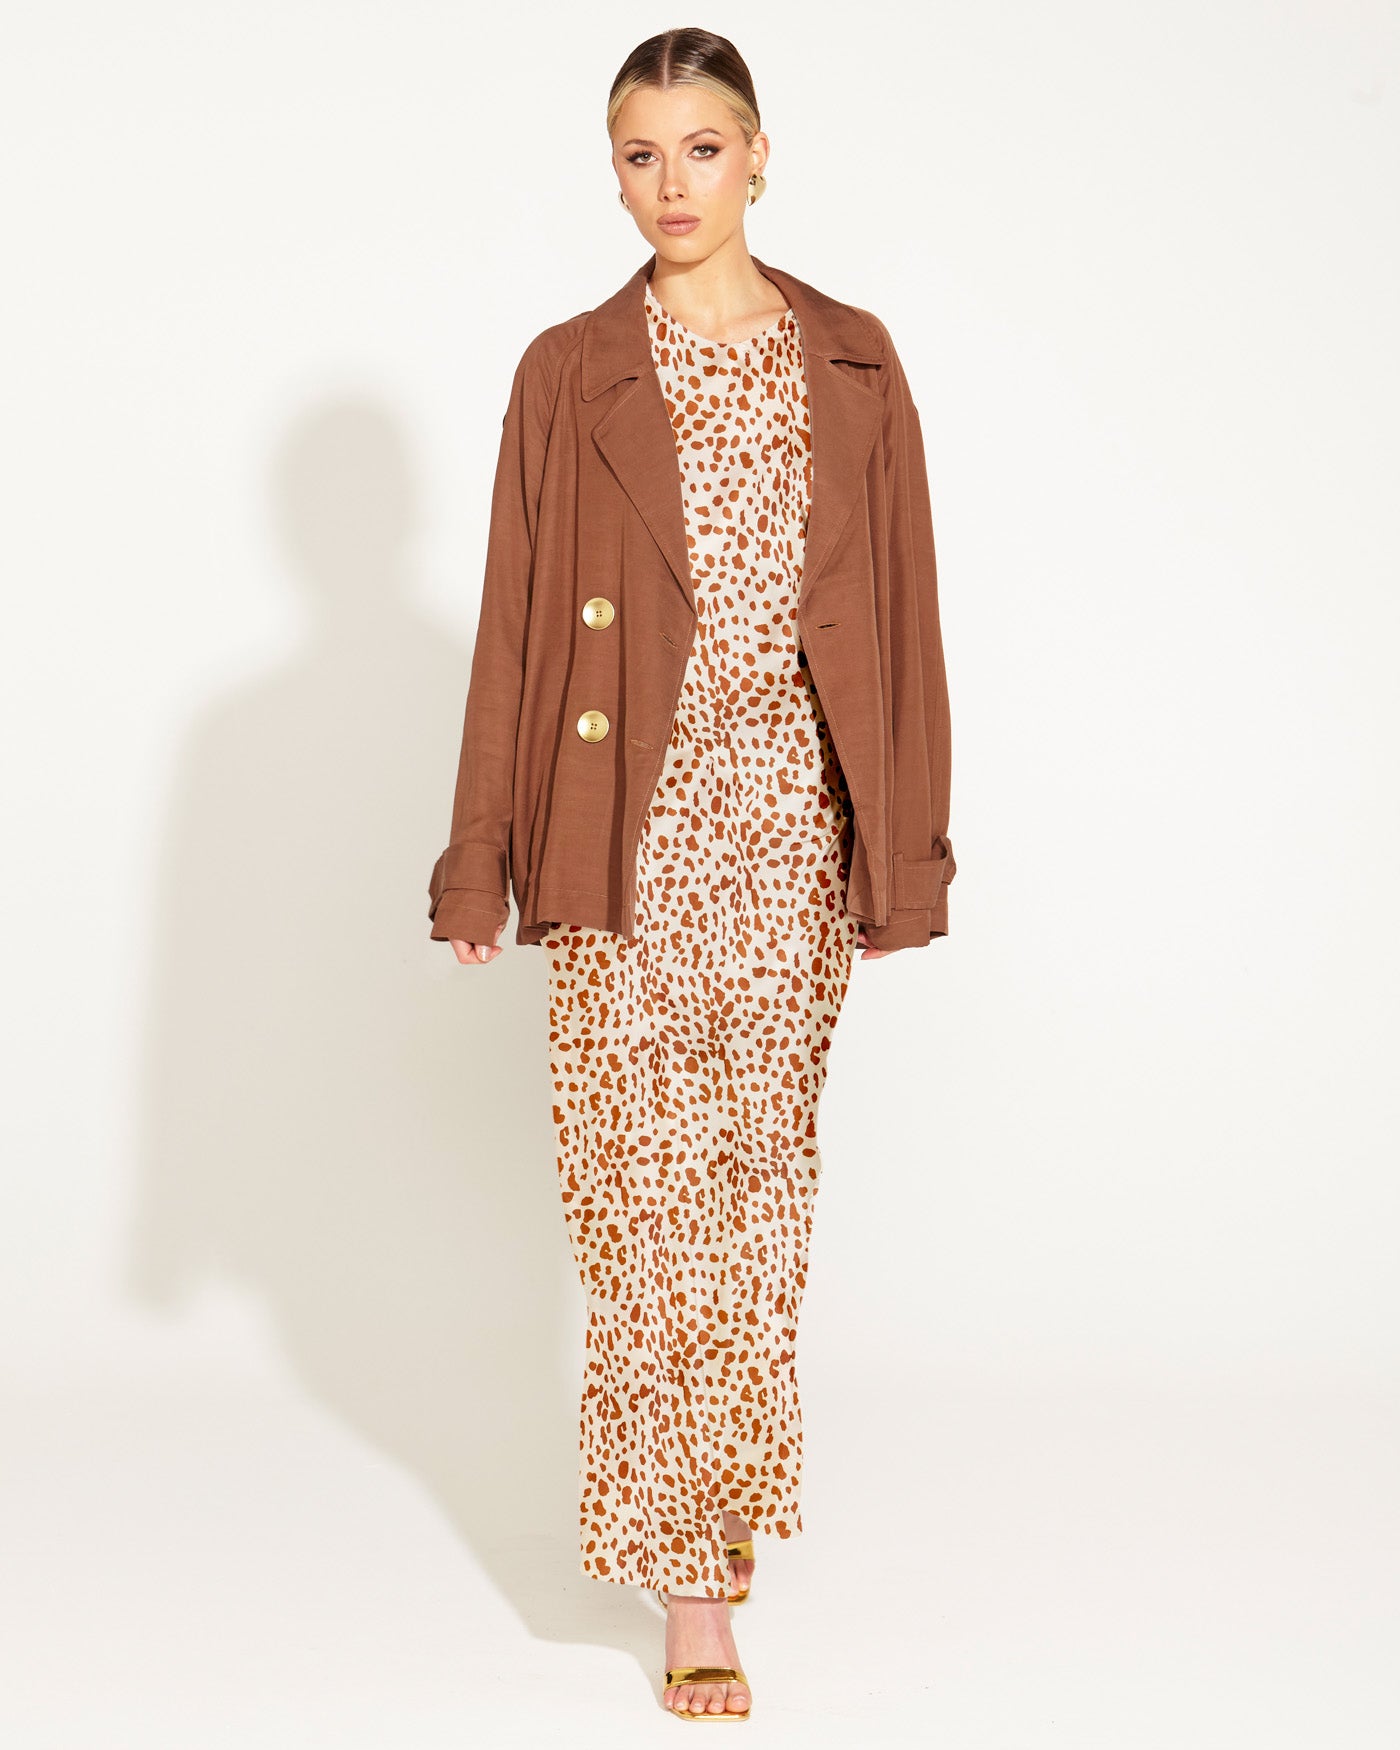 Fate+Becker One And Only Oversized Blazer - Mocha